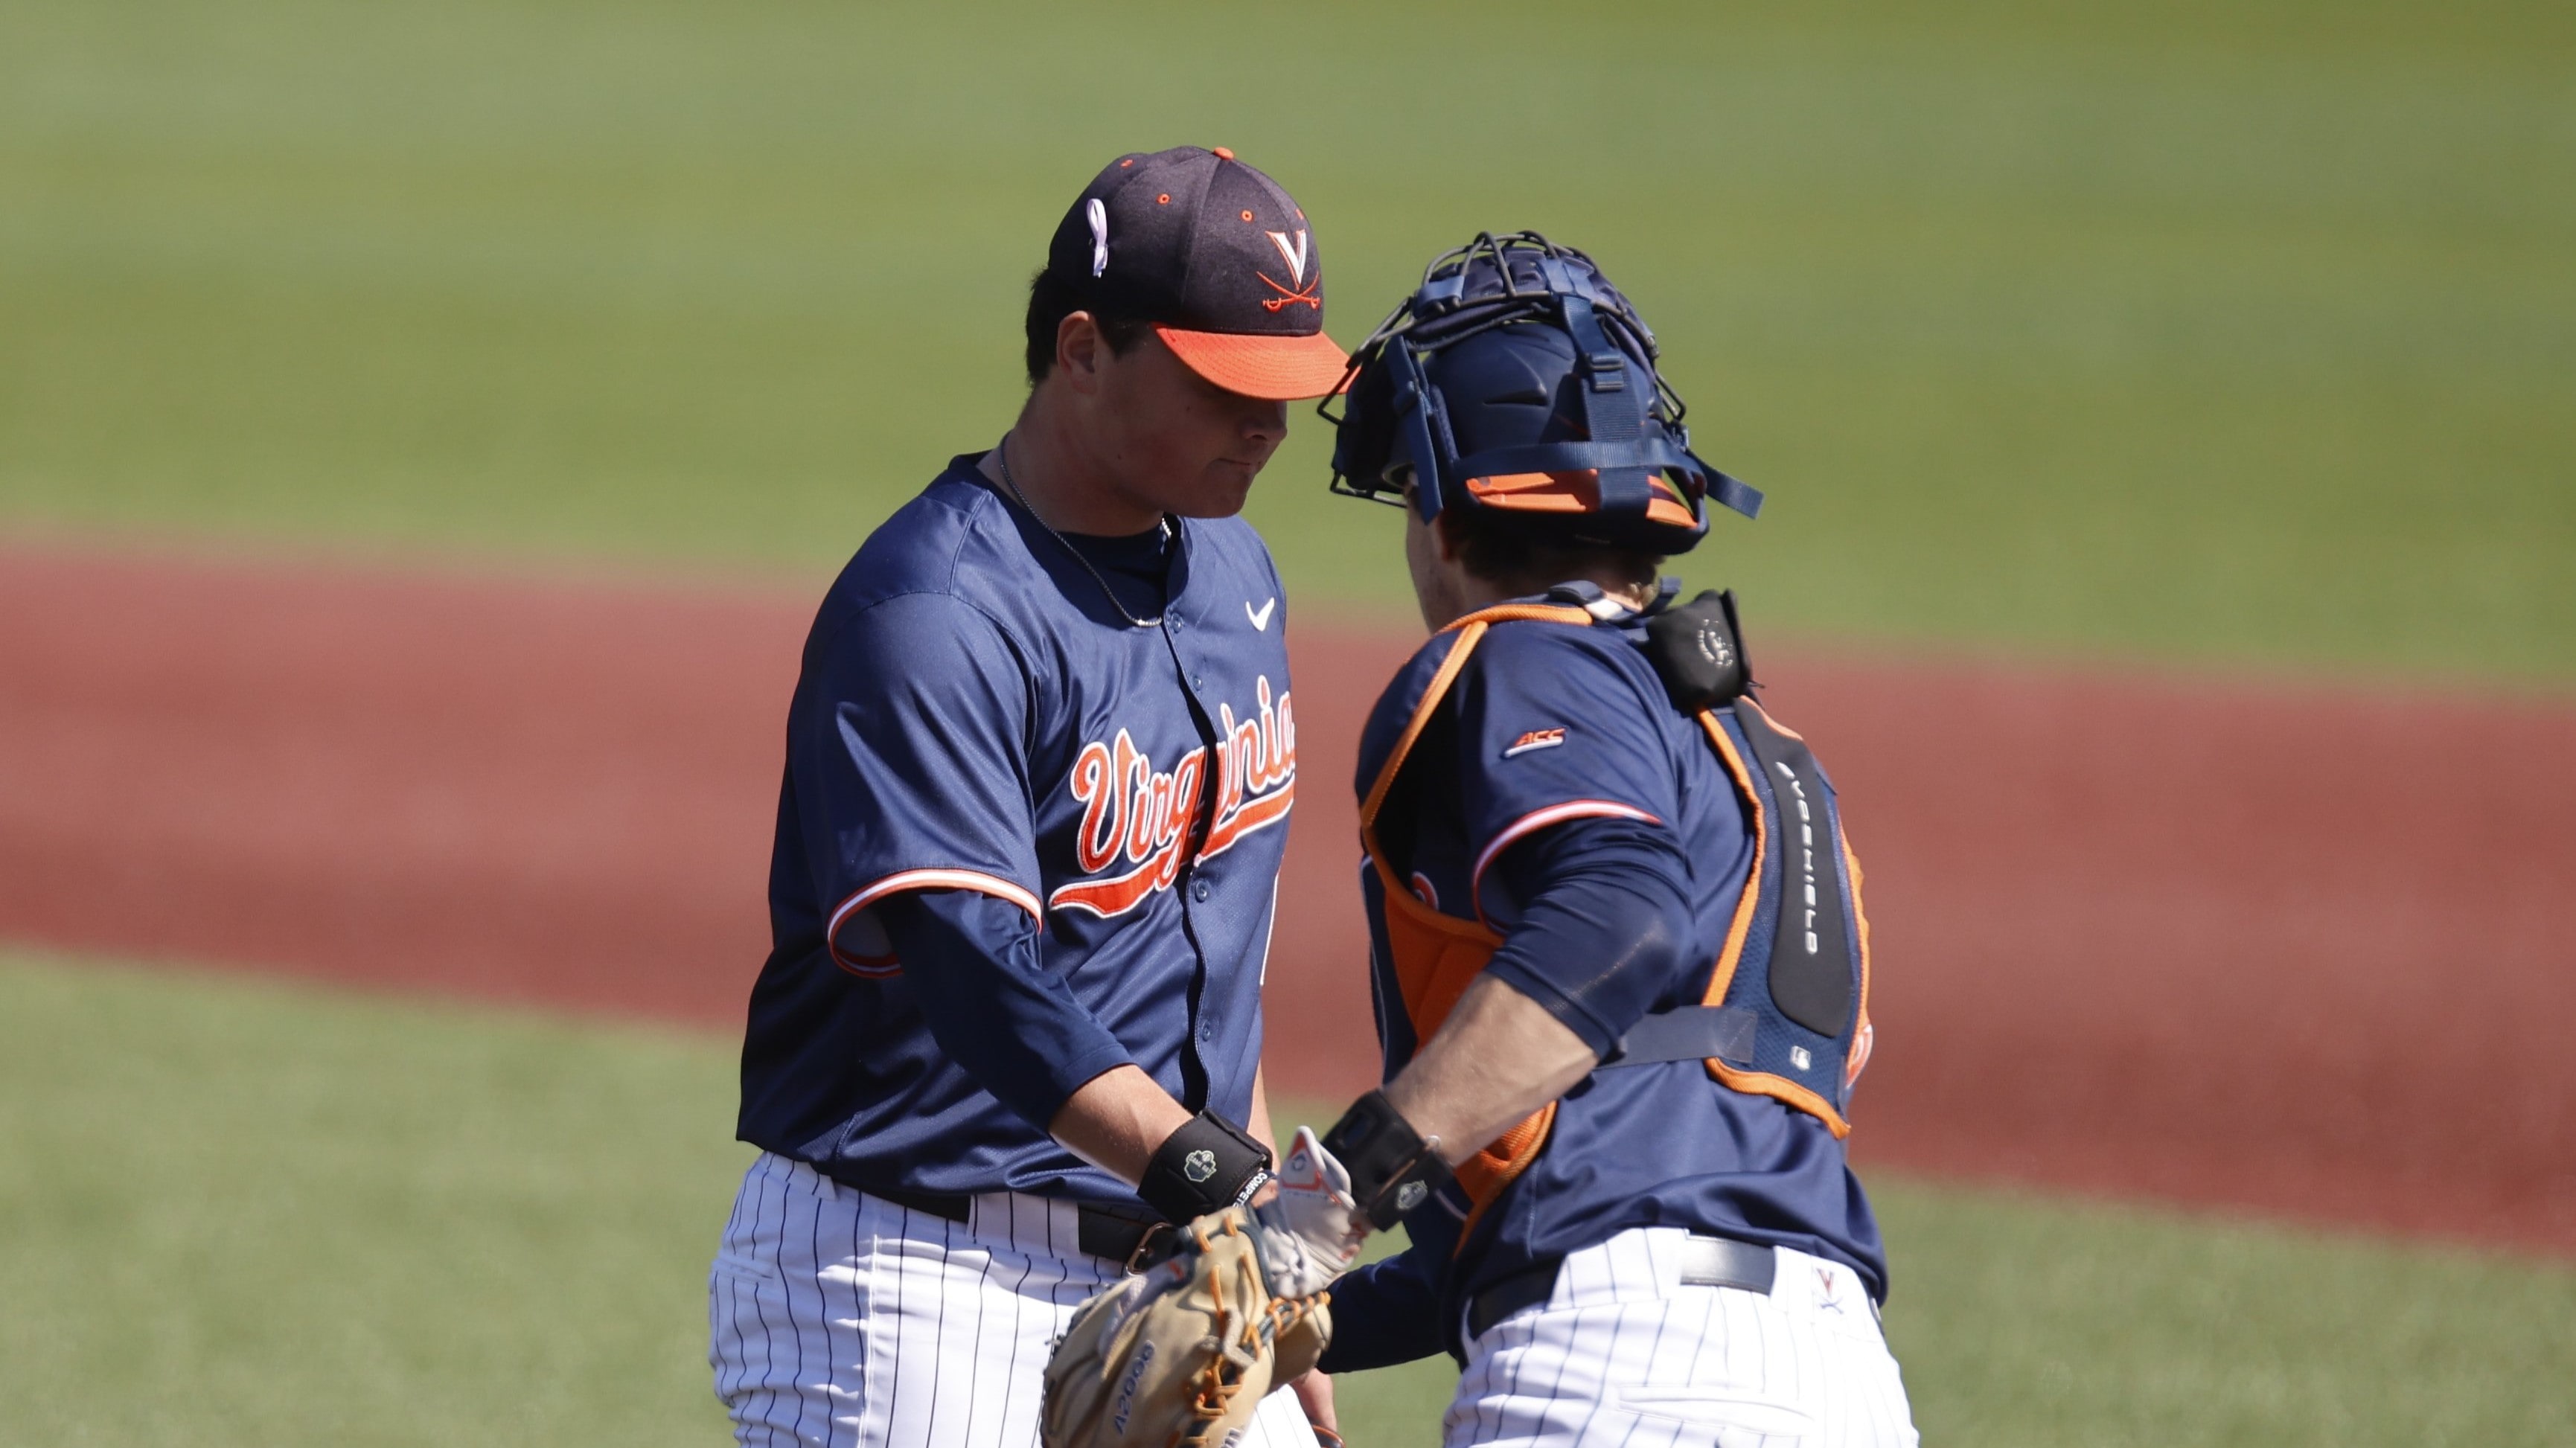 Owen Coady talks to Jacob Ference during the Virginia baseball game at Boston College.